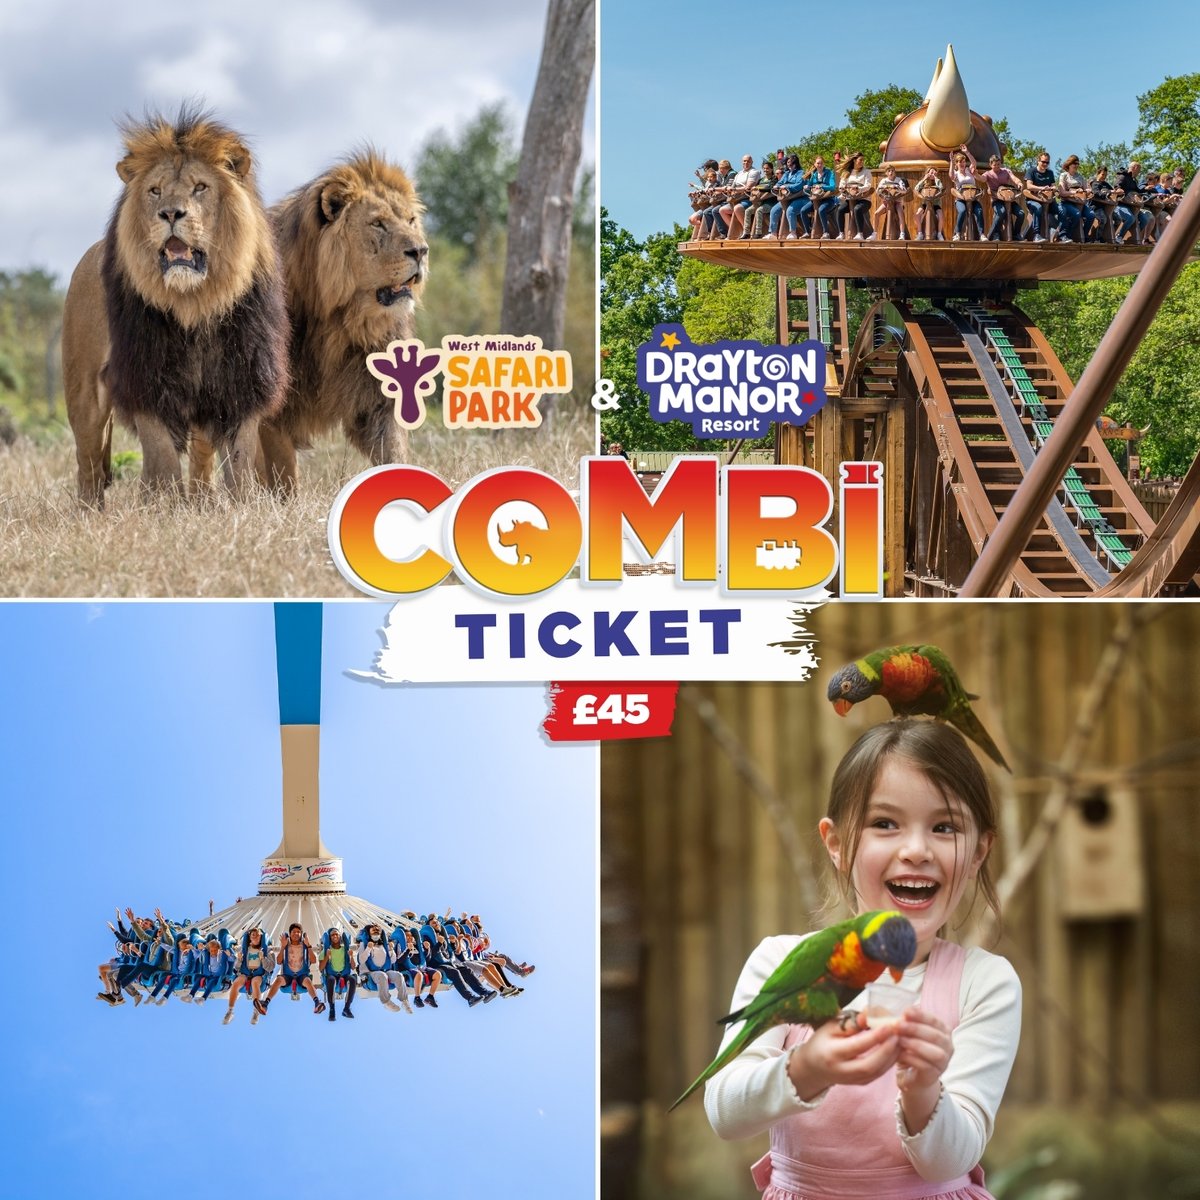 🎢Two days out, double the fun! 🦁 Visit both West Midlands Safari Park and @DraytonManor with our 2-day Combi Ticket and save over 45%! 👉 Book by 26th May for visits up to 30th June! 🎟️ wmsp.co.uk/combi-ticket #WMSP #DraytonManor #DoubleTheFun